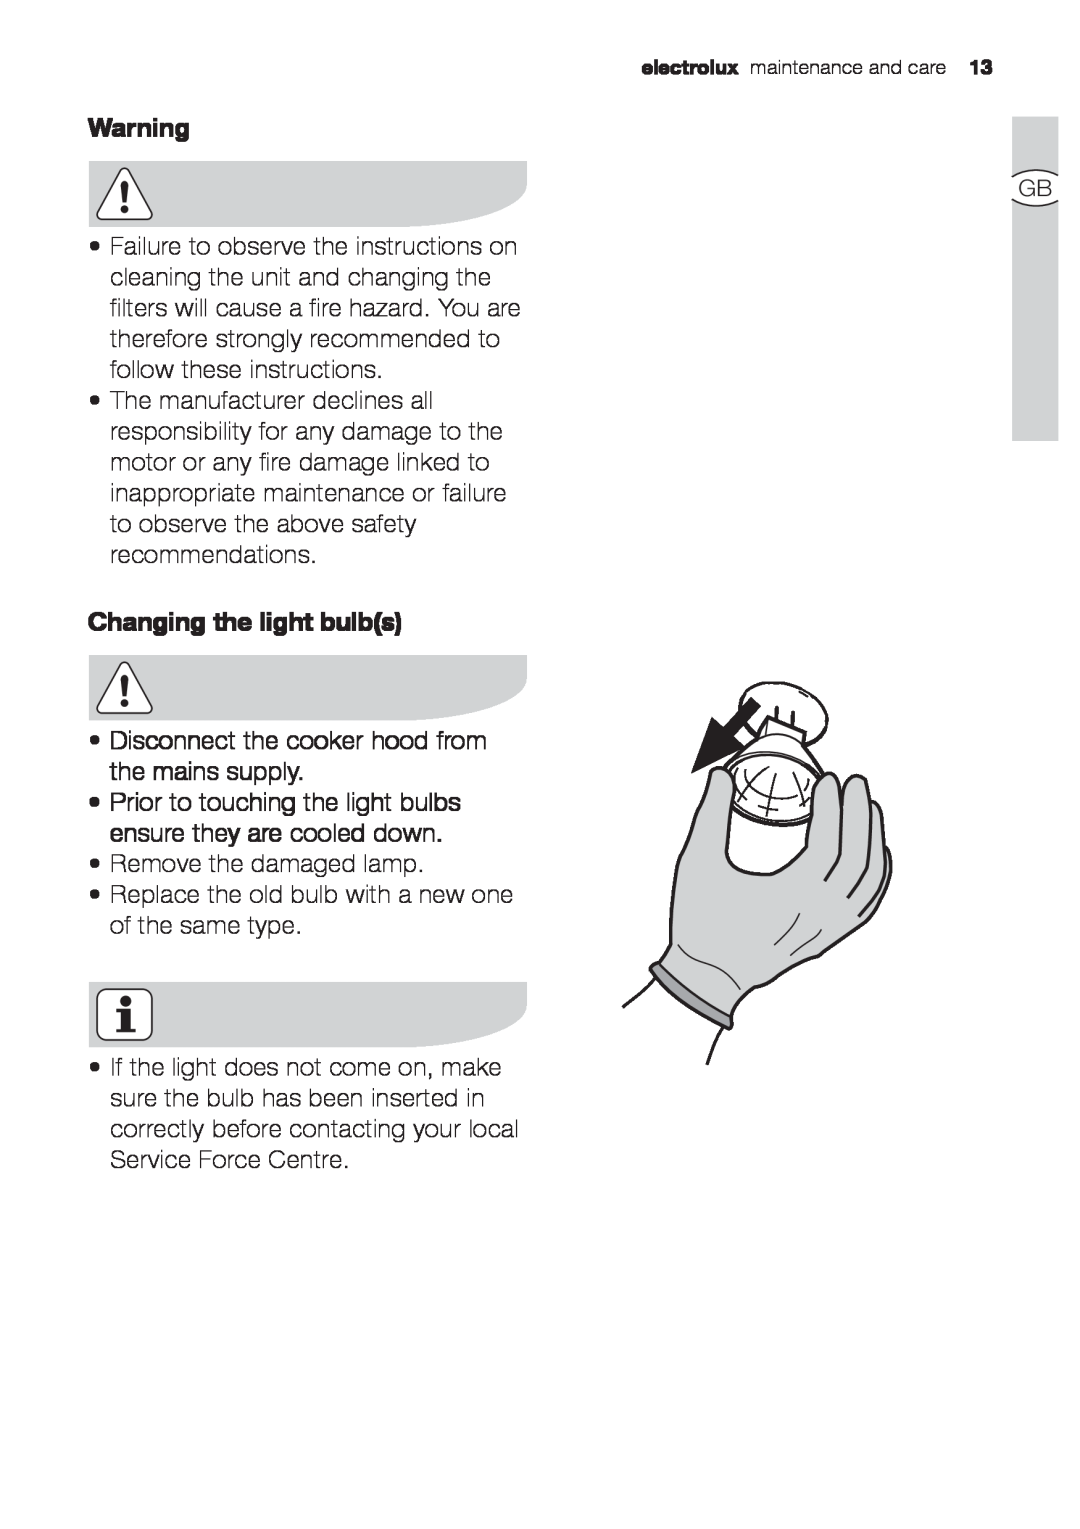 Electrolux EFC 9441, EFC 6441 user manual Changing the light bulbs, Disconnect the cooker hood from the mains supply 